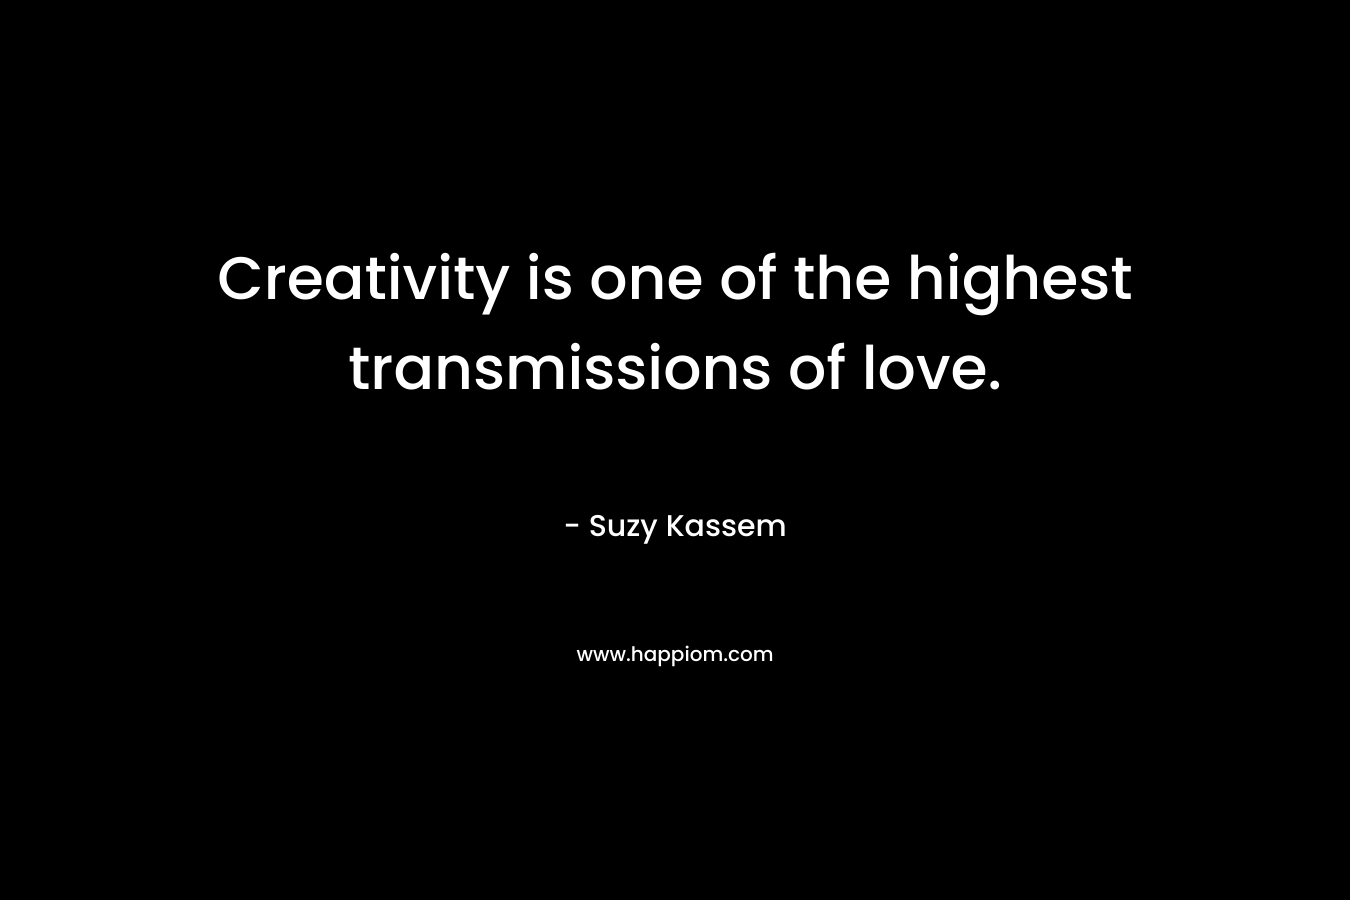 Creativity is one of the highest transmissions of love. – Suzy Kassem